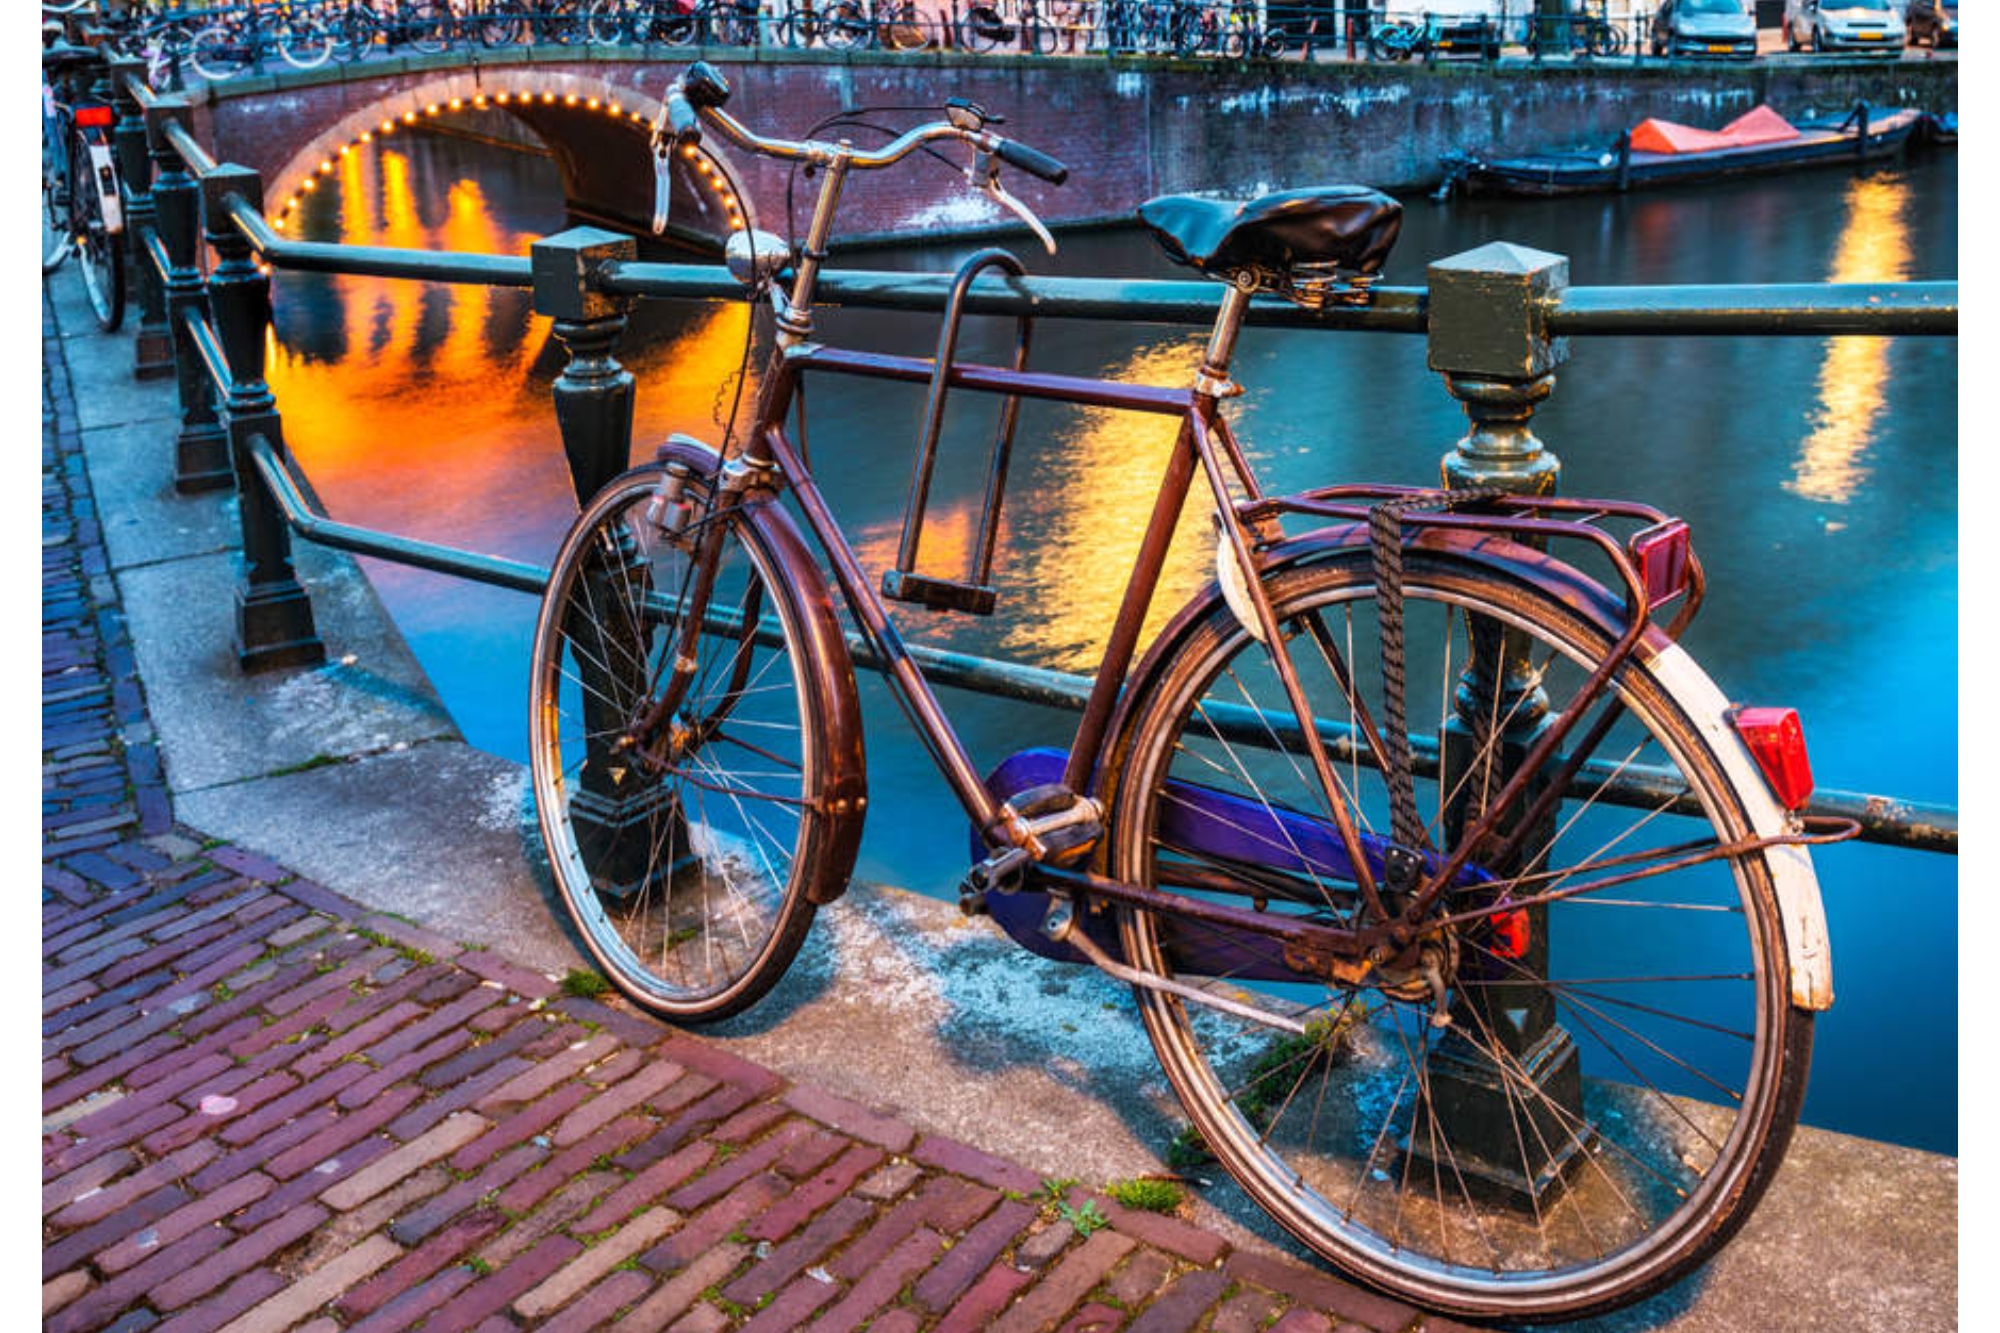 Dutch bikes can make the best commuter bikes for some. This image shows a bike at night lent up against railings with water behind it and a bridge illuminated in the background. The bike is pointing away from the viewer with the handlebars pointing left